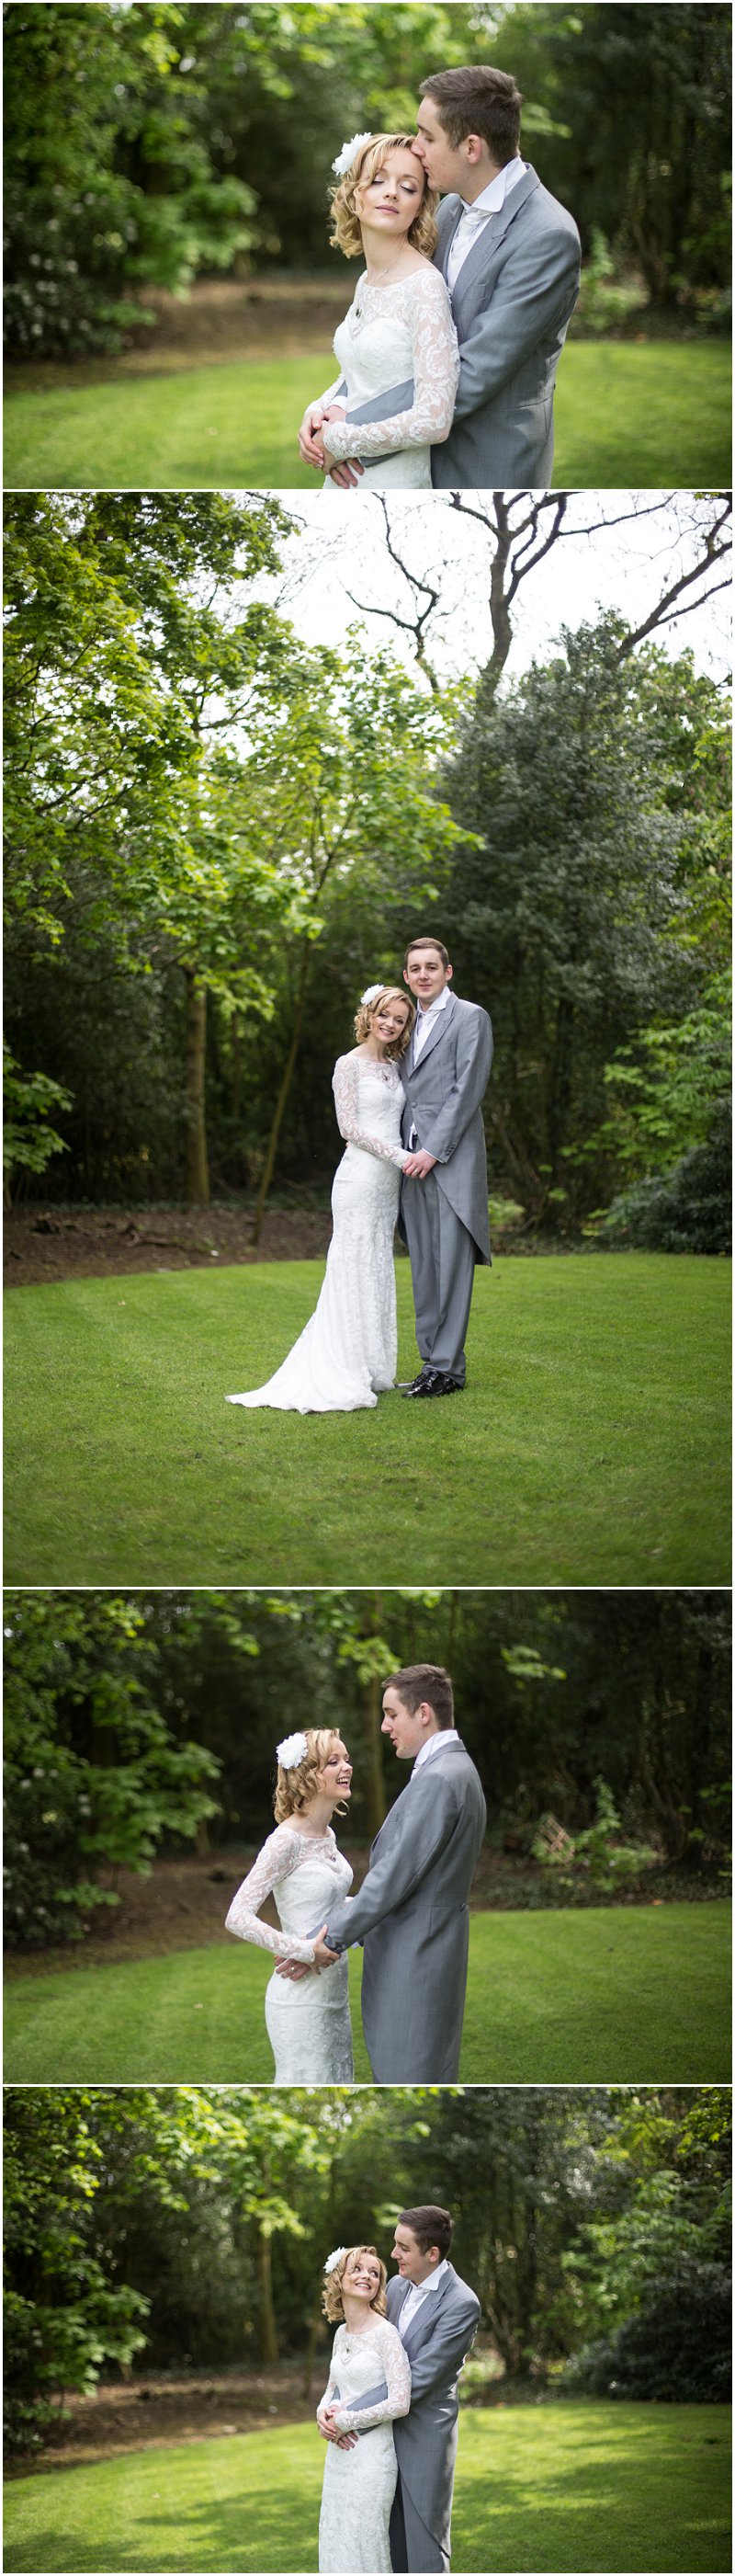 Beautiful bride and groom in gardens at Ashfield House Standish